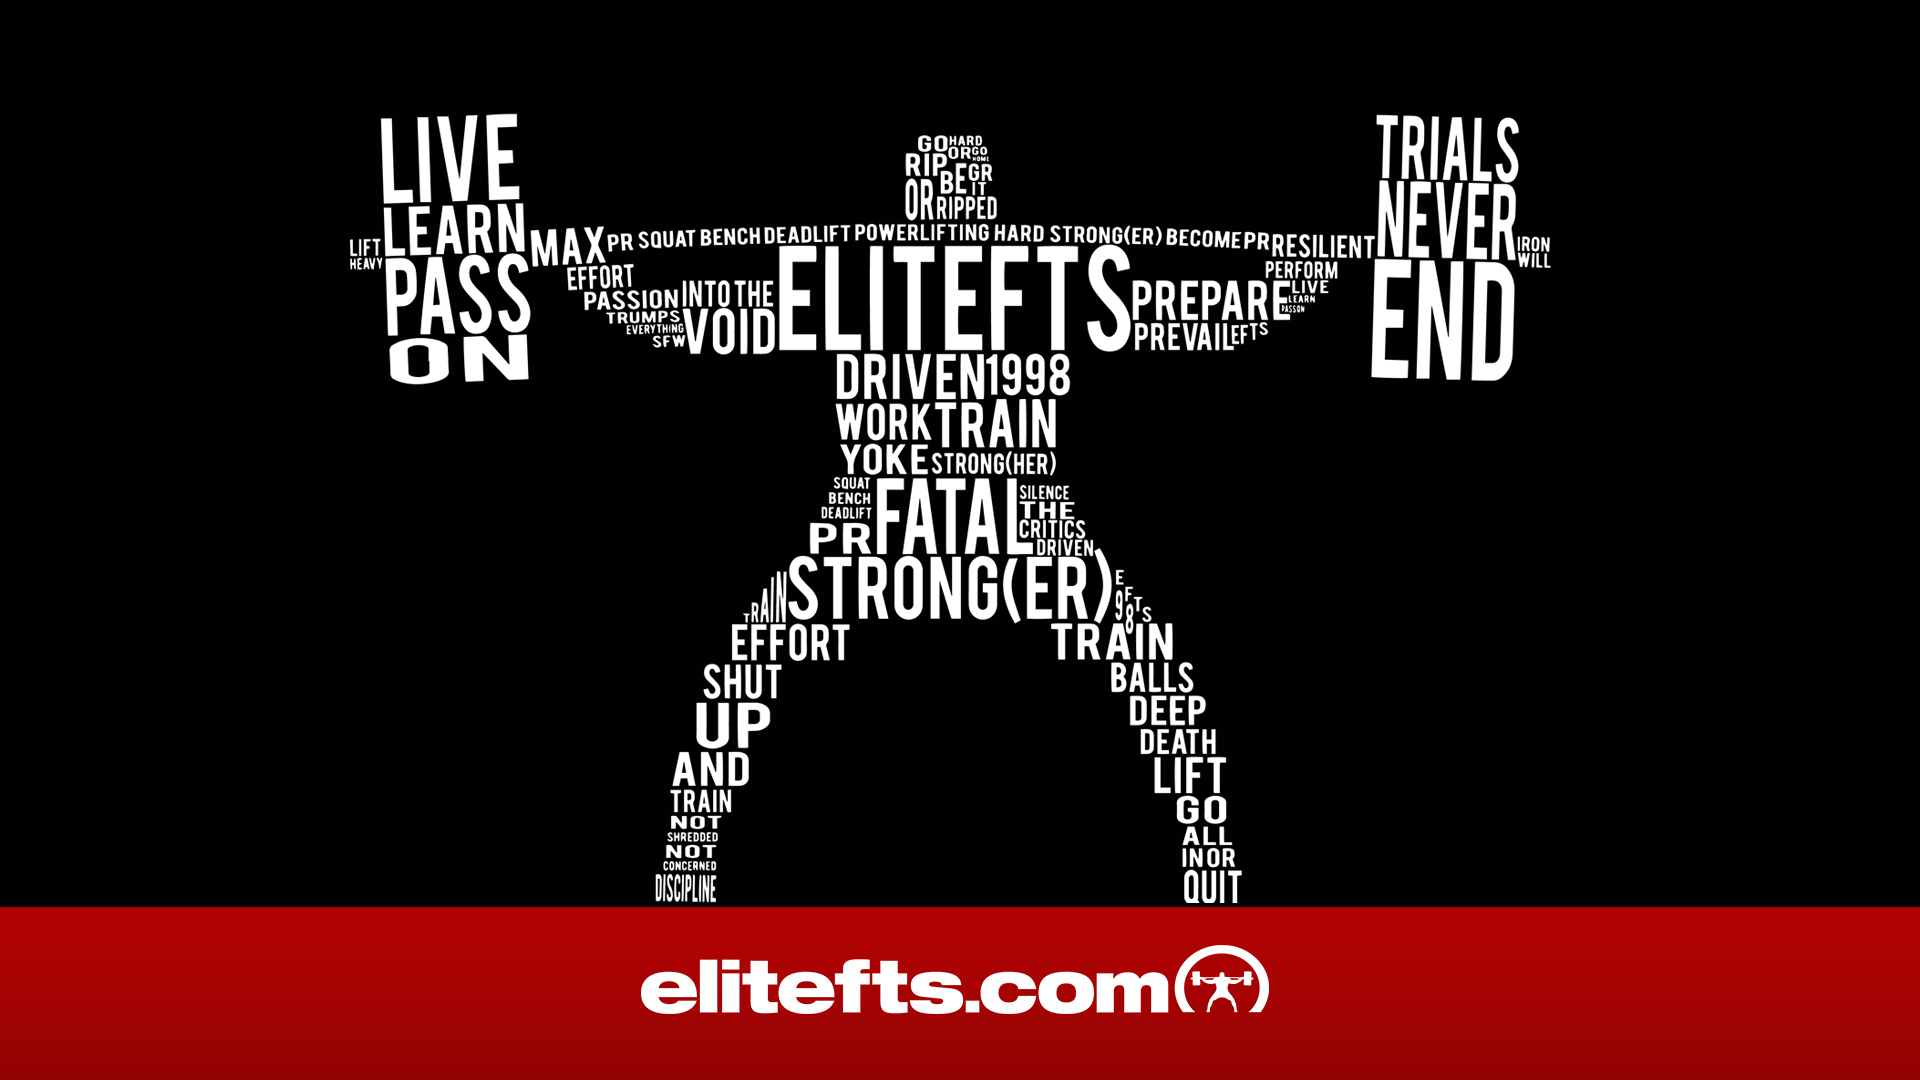 Another Saturday at Elitefts 